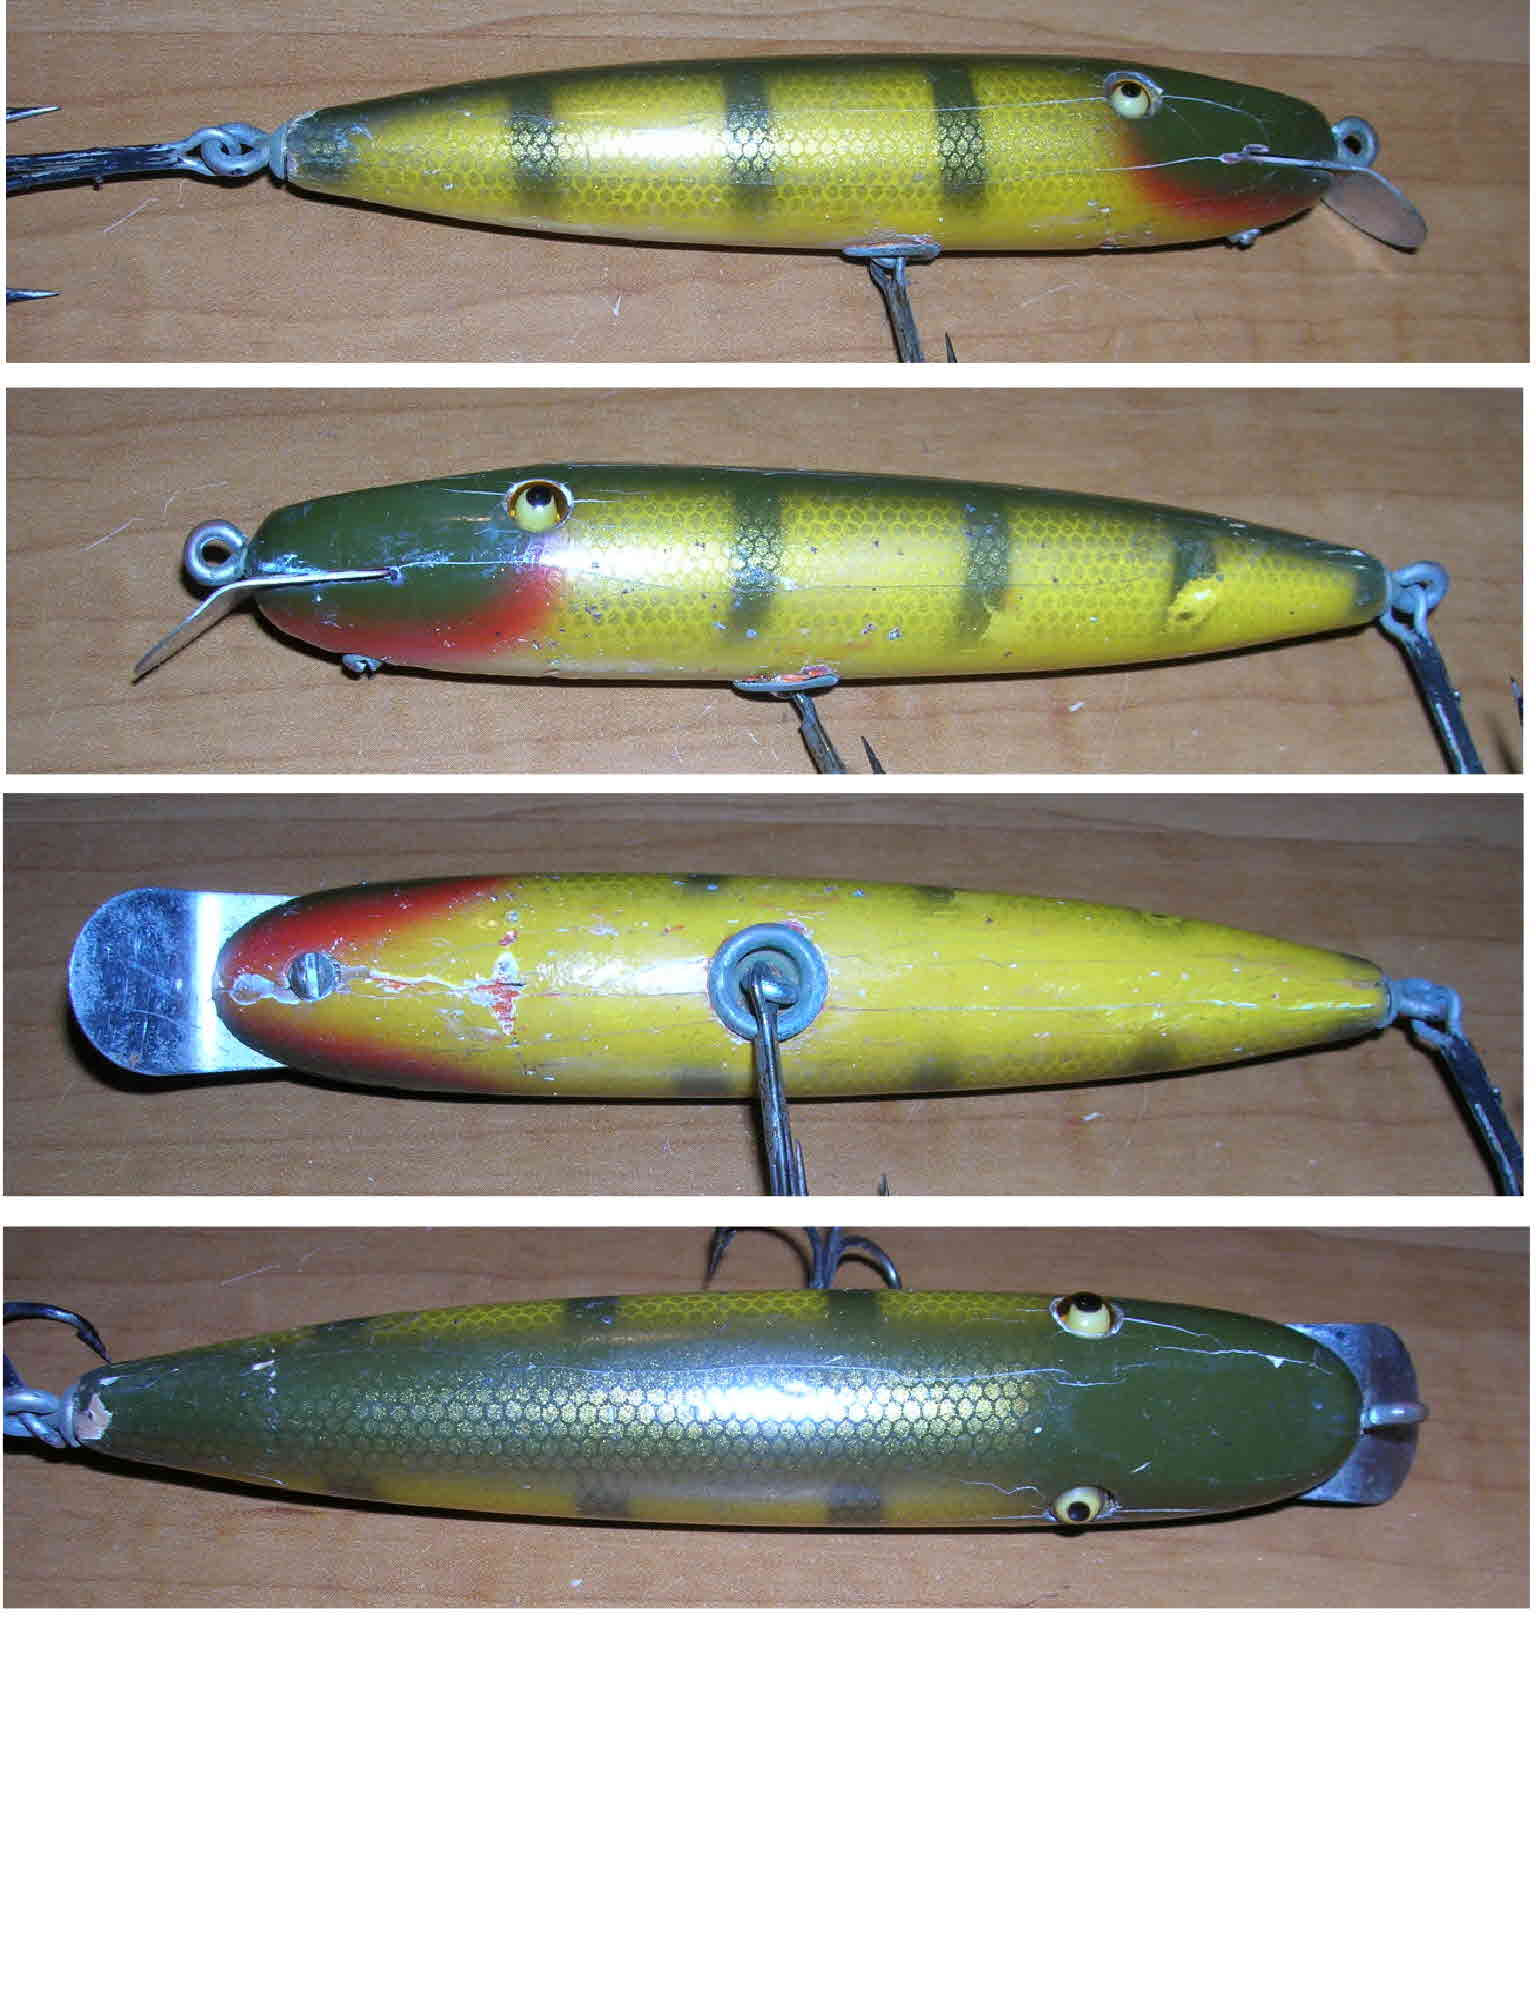 Vintage Shur-strike Minnows Fishing Lure Box Only for 1941 Scarce Model  Creek Chub Pike in Yellow Spotted Color P14 